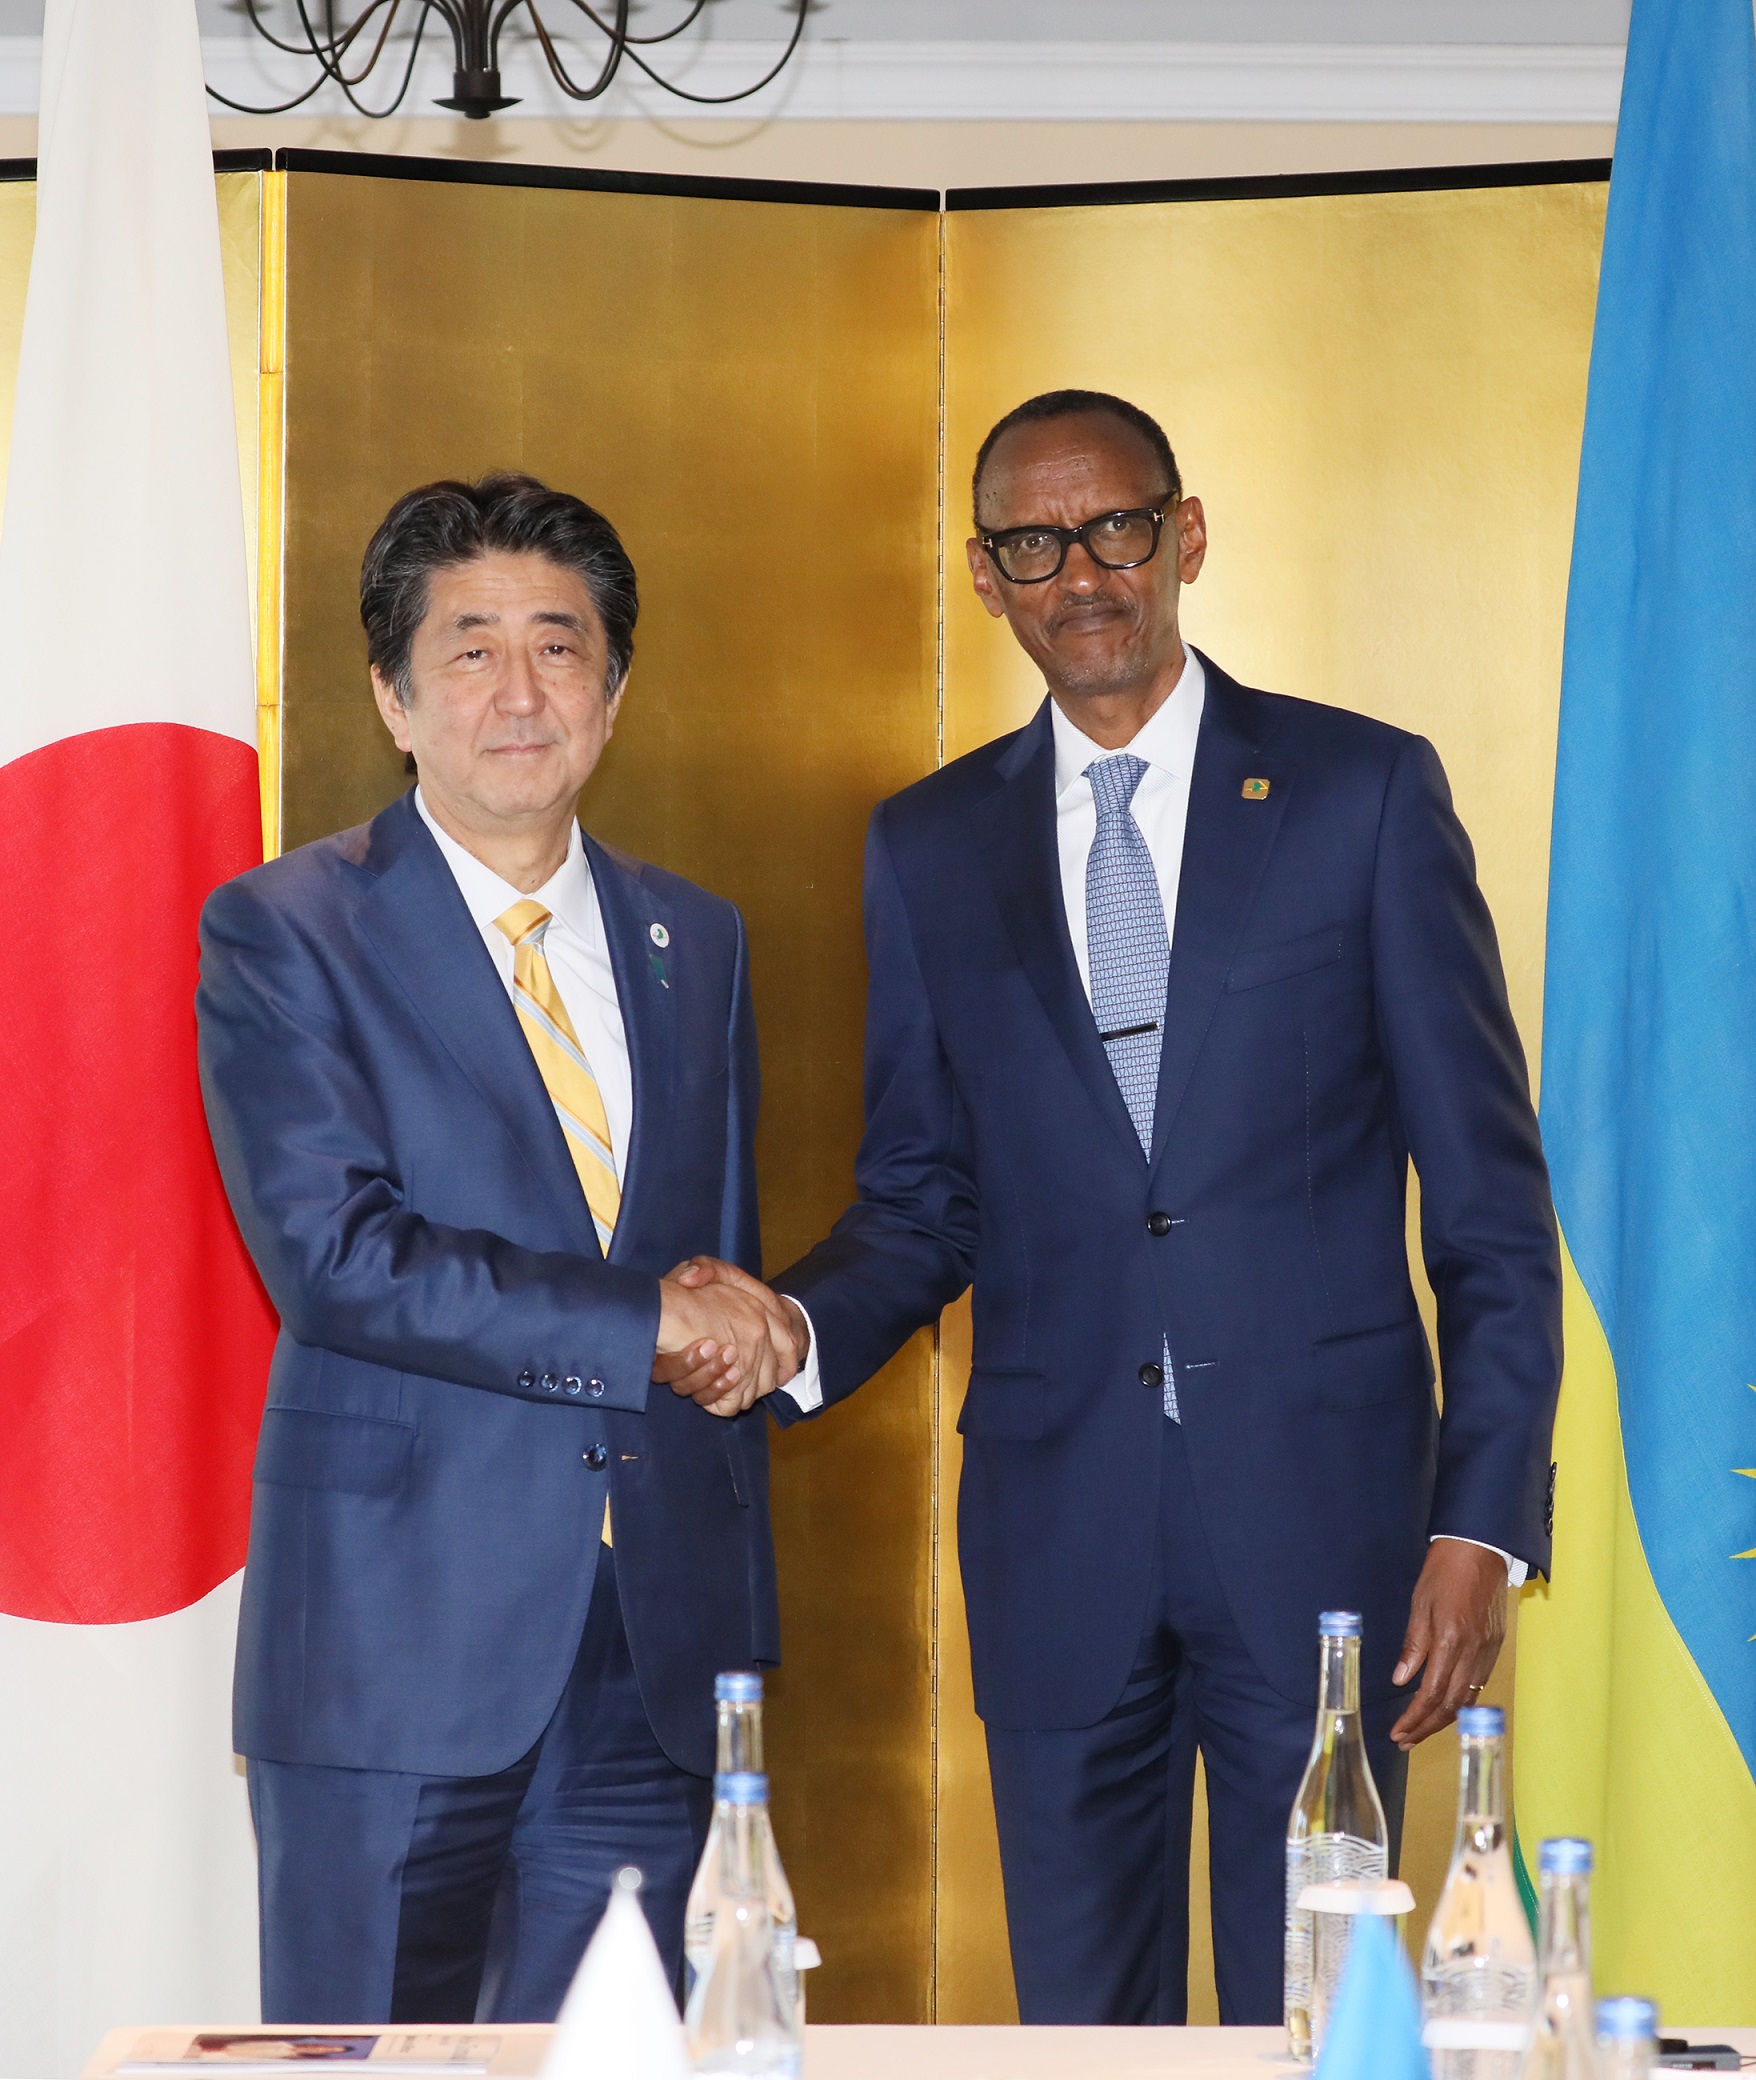 File Paul Kagame The President Of Rwanda Meets With Shinzō Abe The Prime Minister Of Japan Jpg Wikimedia Commons